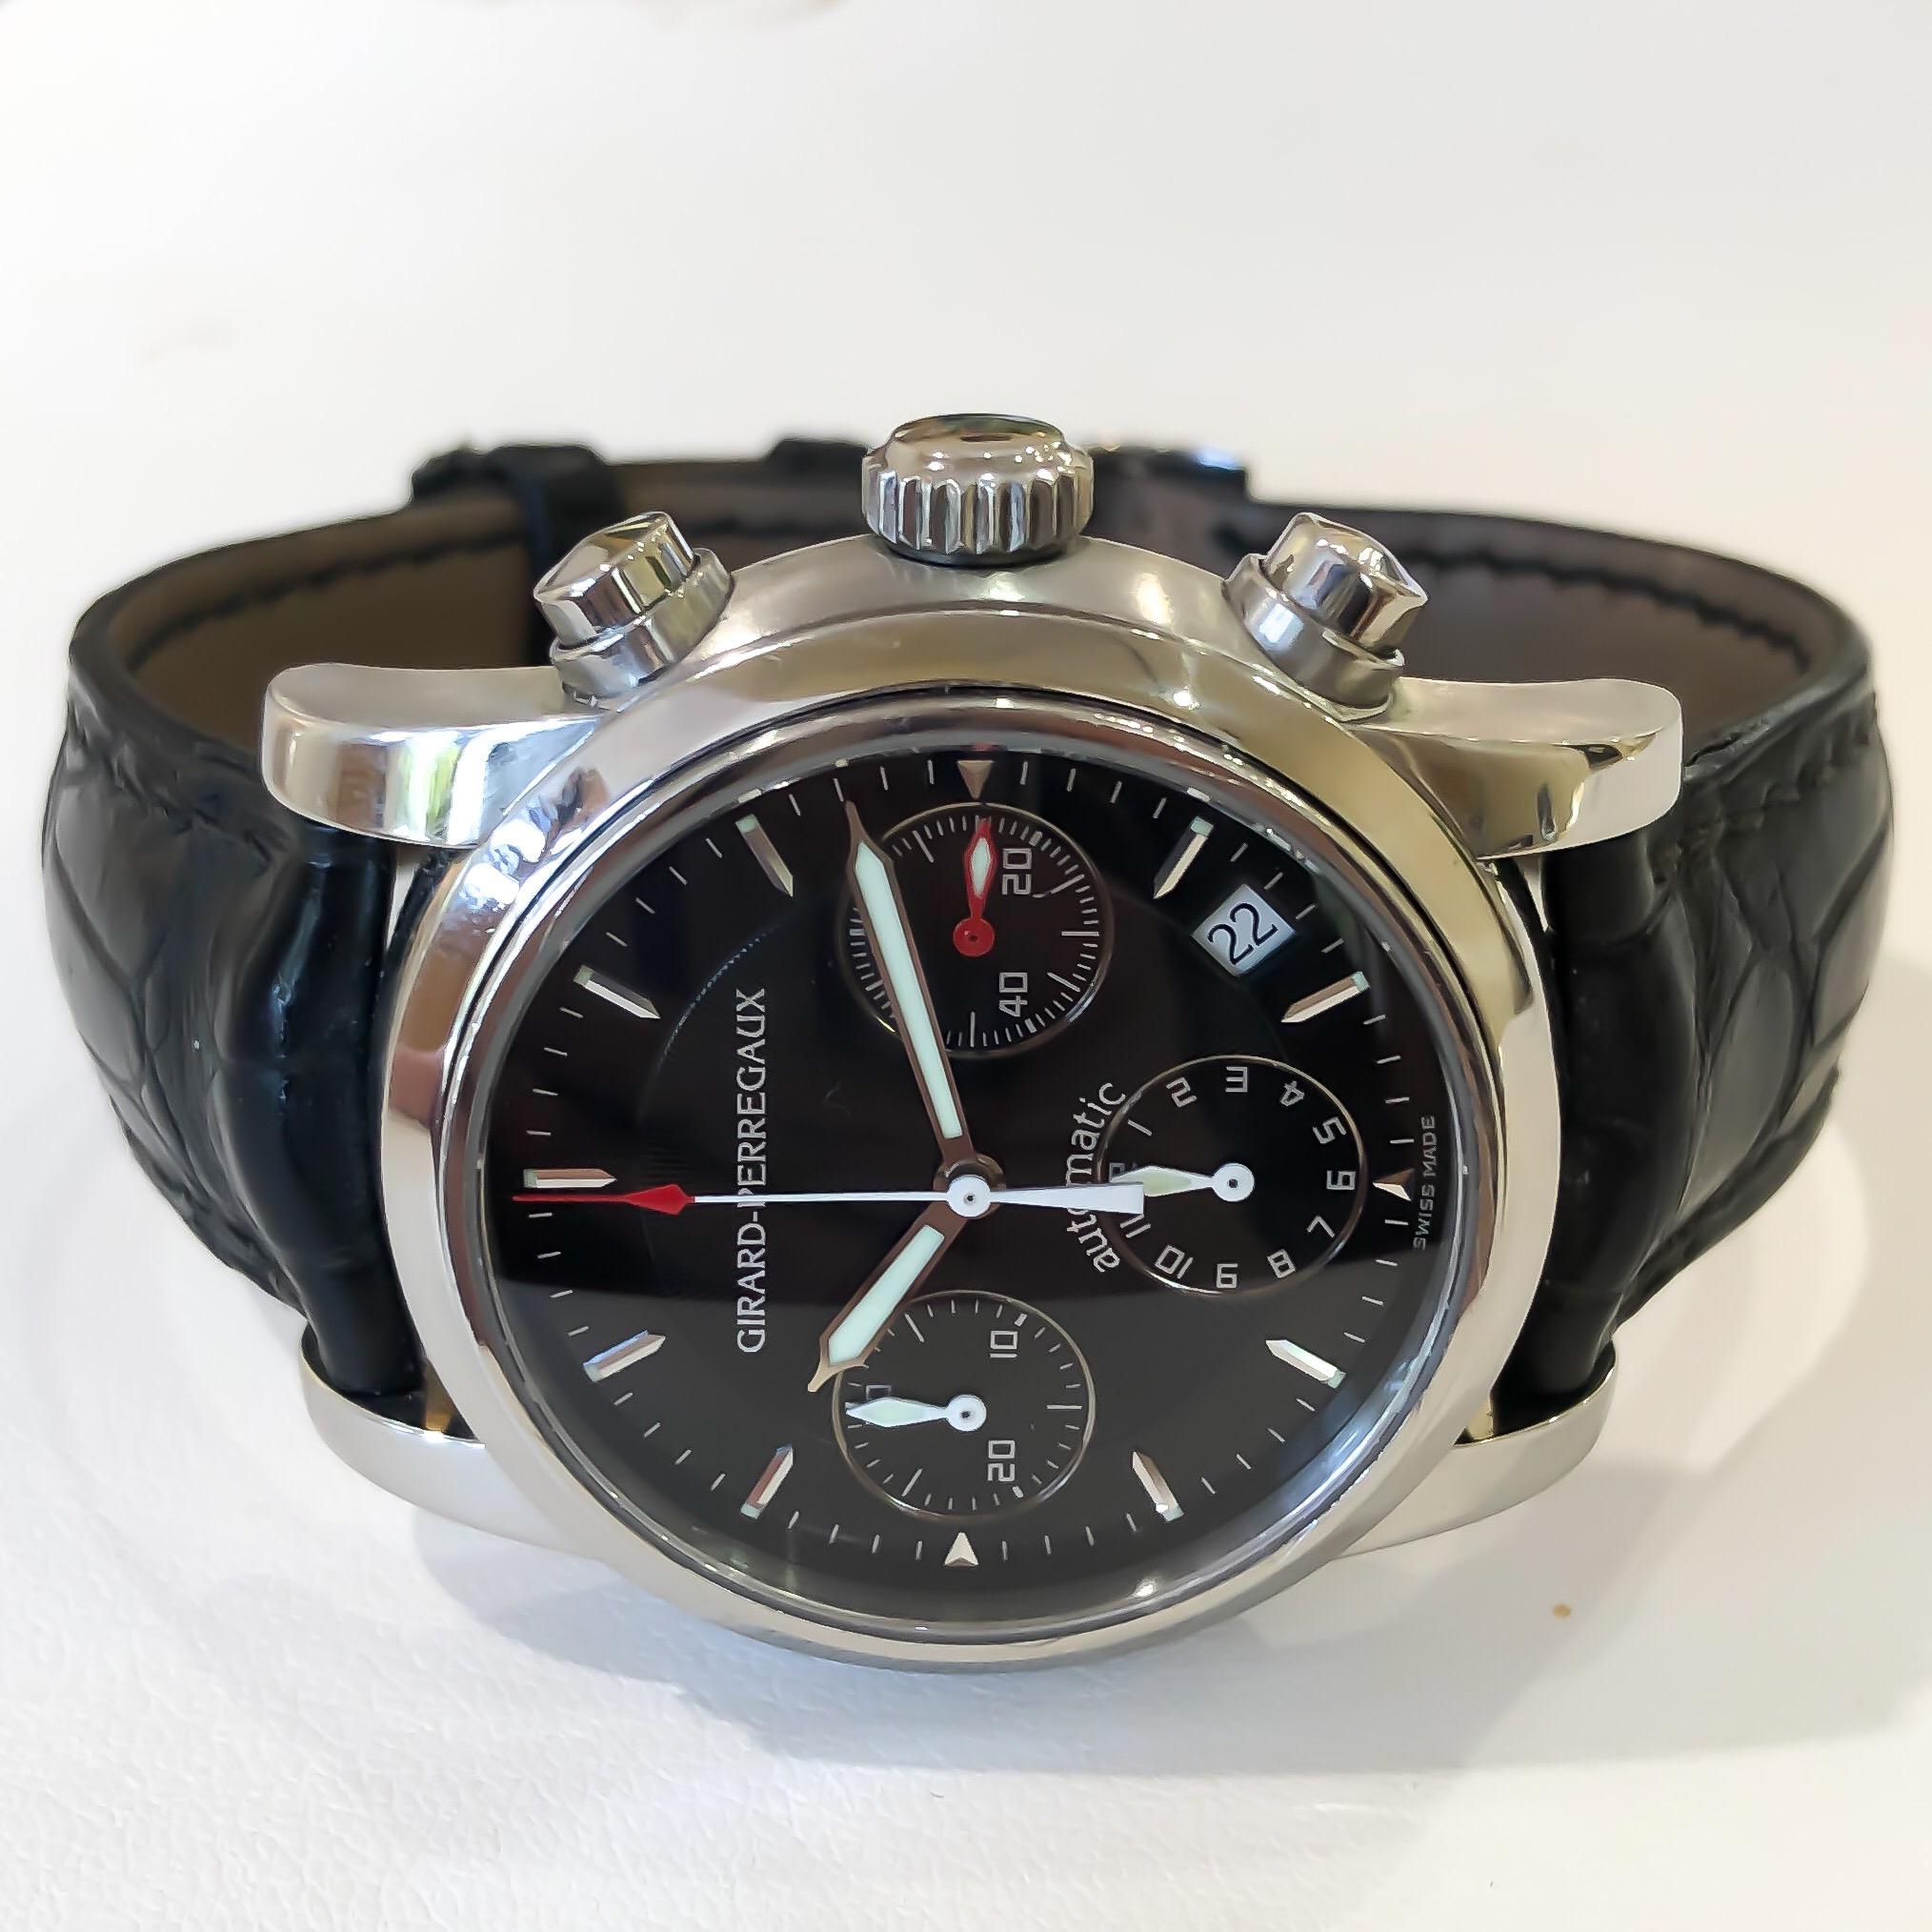 Men's Girard Perregaux Chronograph Sport Classique Steel Automatic Black Watch

•MODEL: SPORT CLASSIQUE
•REFERENCE NO: 8021 AN 27
•MOVEMENT: MECHANICAL AUTOMATIC SELF WINDING
•CASE MATERIAL: STAINLESS STEEL
•CONDITION: LIKE NEW EXCELLENT PRE-OWNED